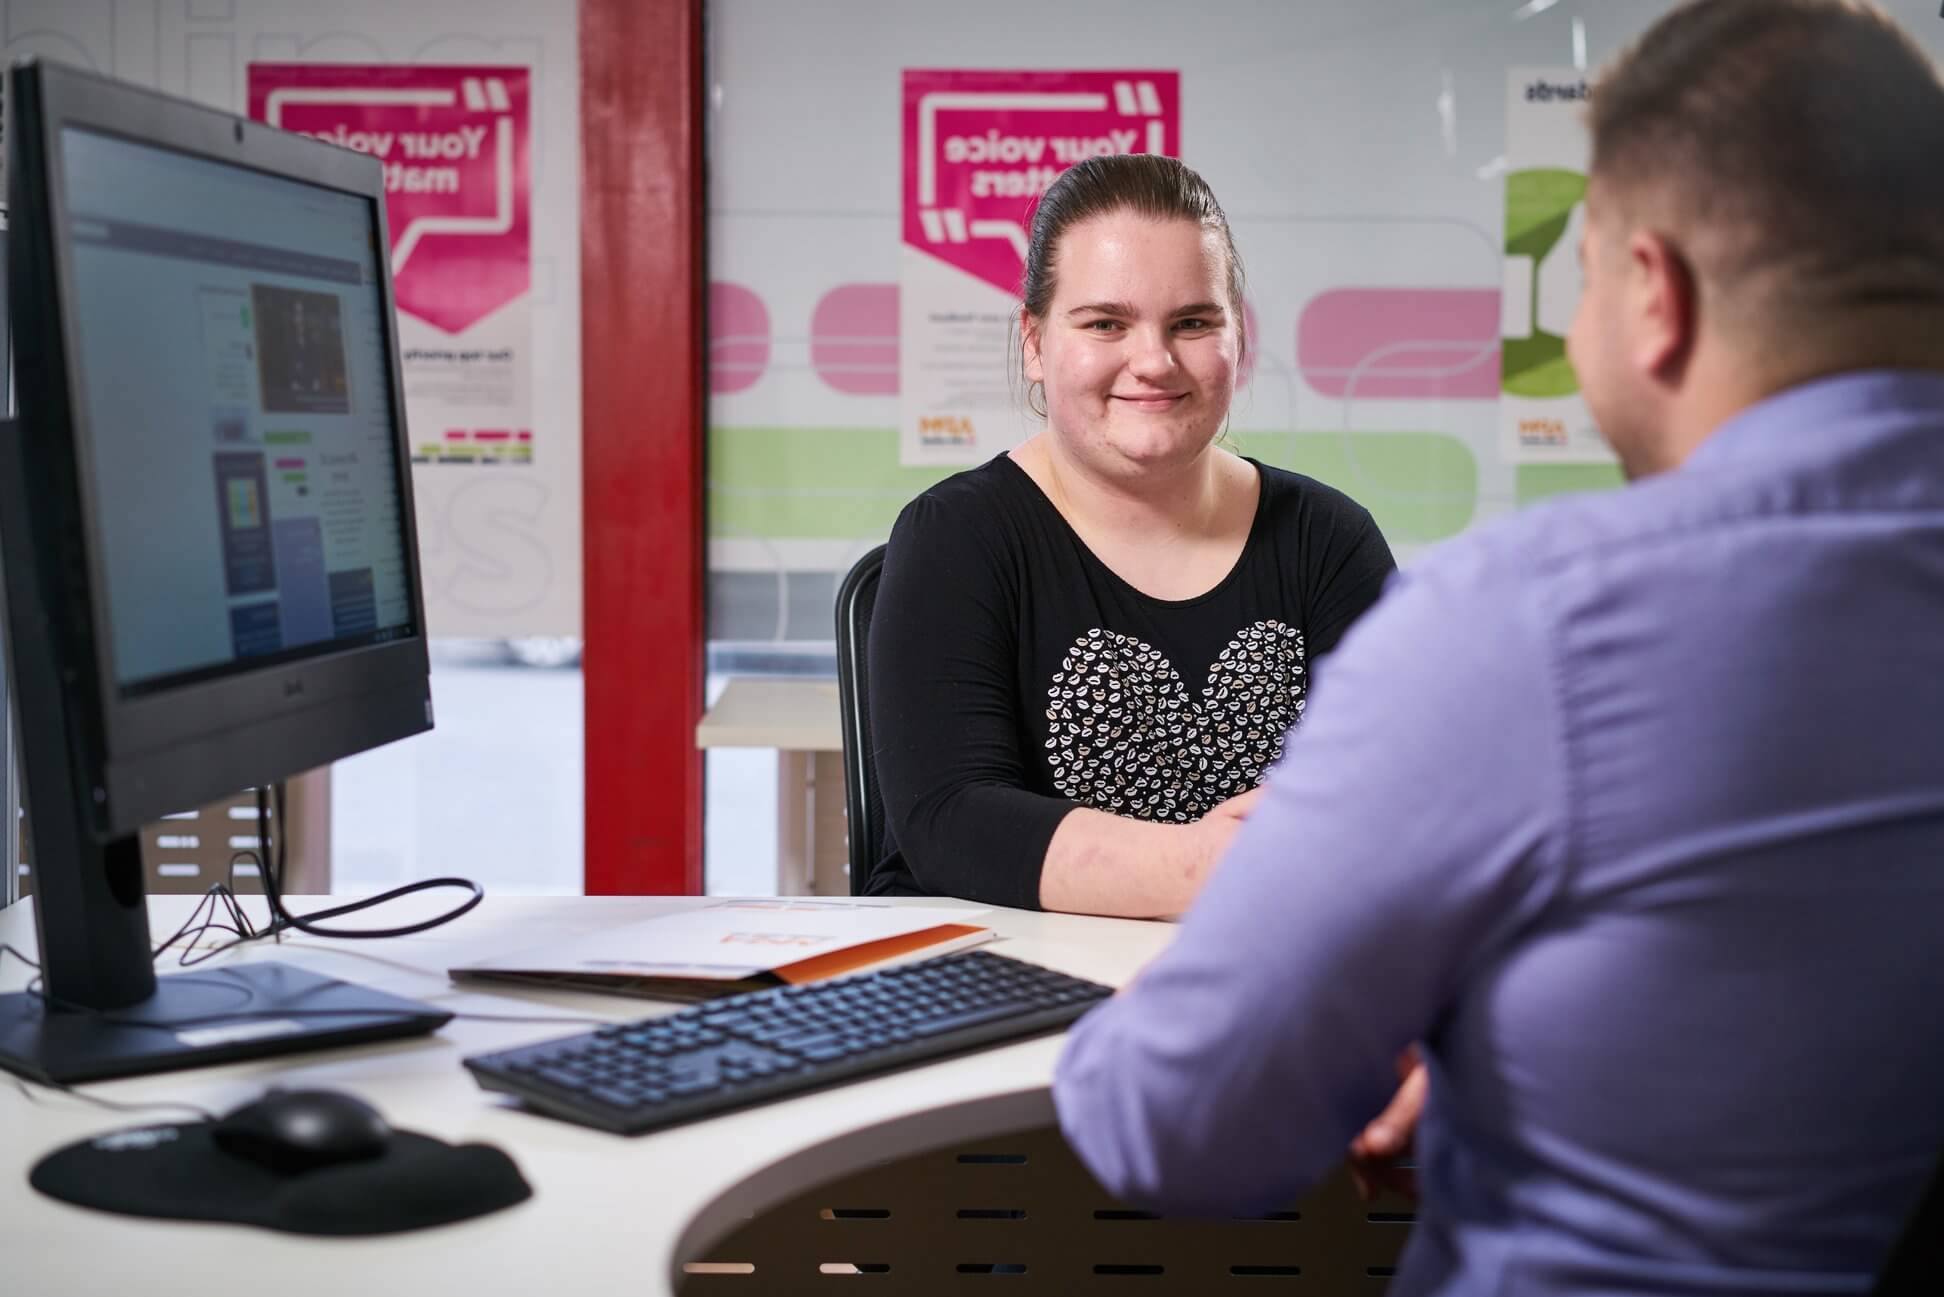 Maddy has an intellectual disability and came to APM for help in finding a job